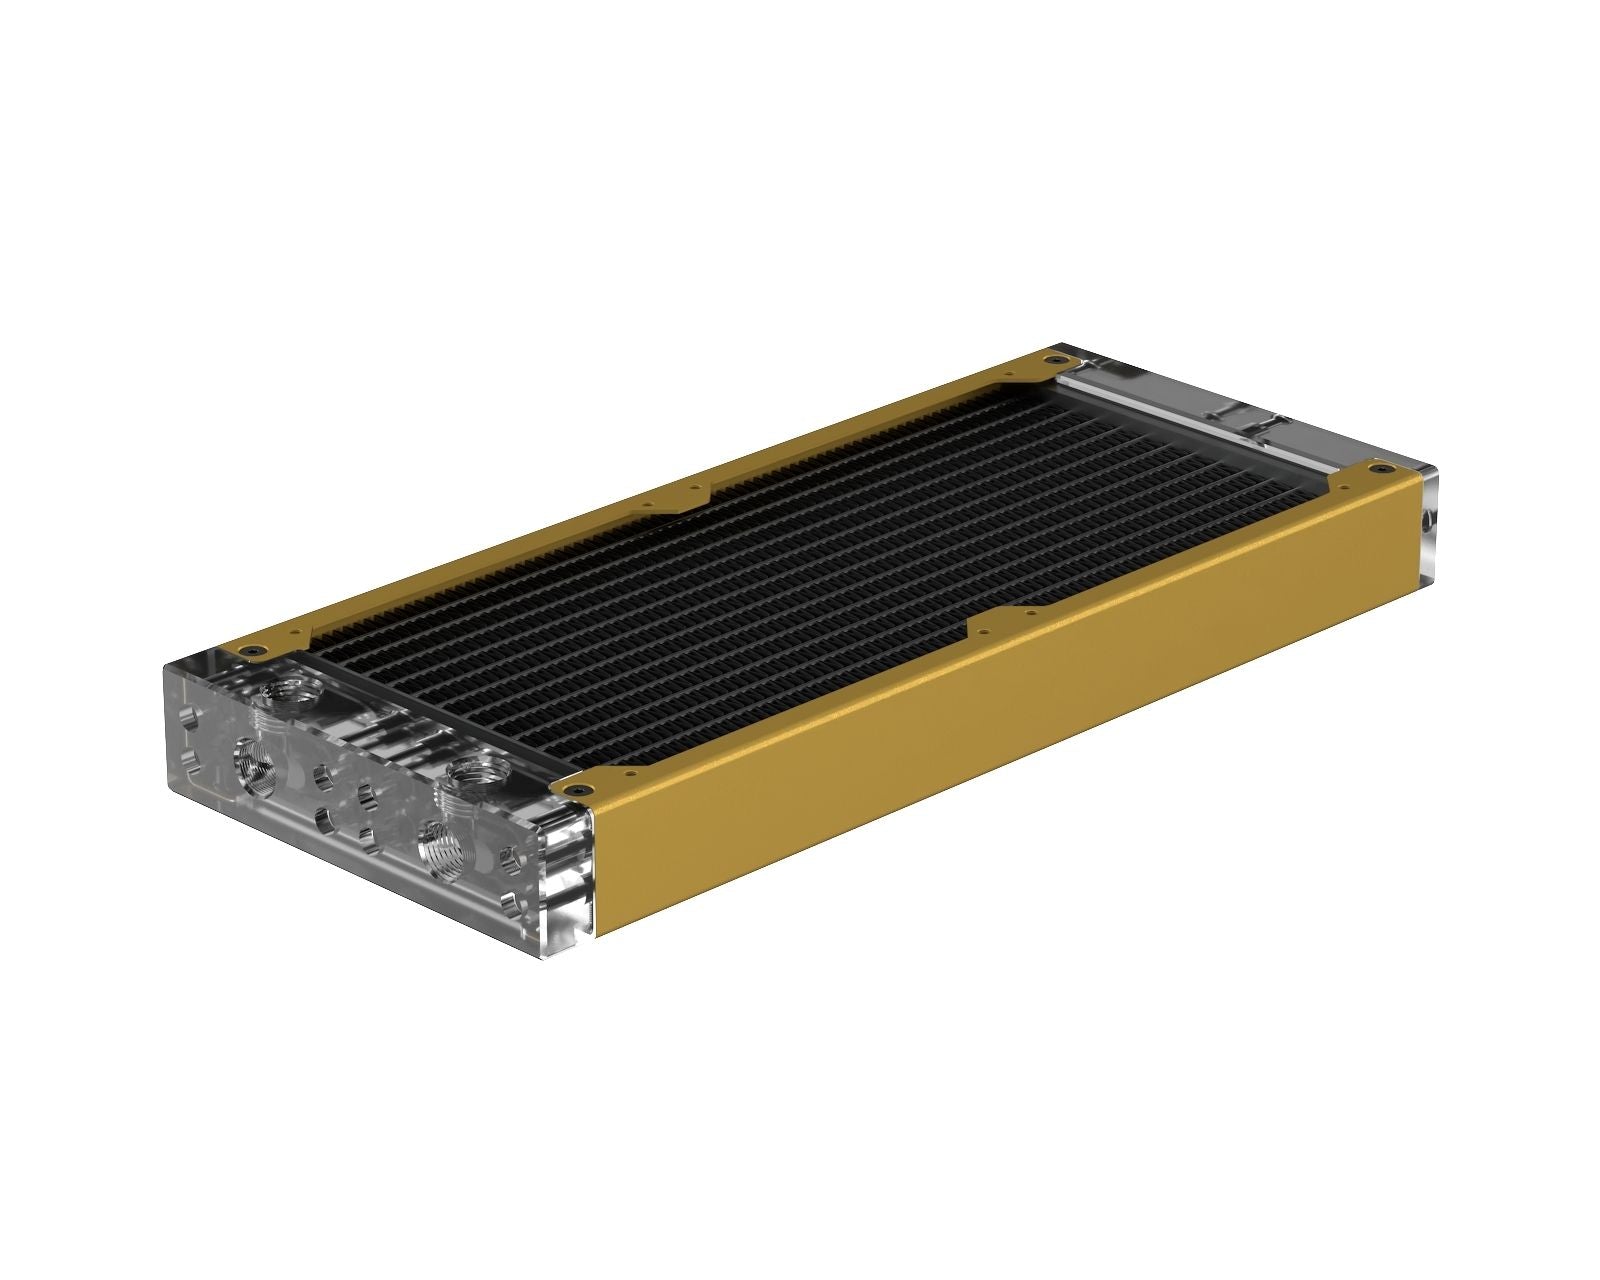 PrimoChill 240SL (30mm) EXIMO Modular Radiator, Clear Acrylic, 2x120mm, Dual Fan (R-SL-A24) Available in 20+ Colors, Assembled in USA and Custom Watercooling Loop Ready - Gold